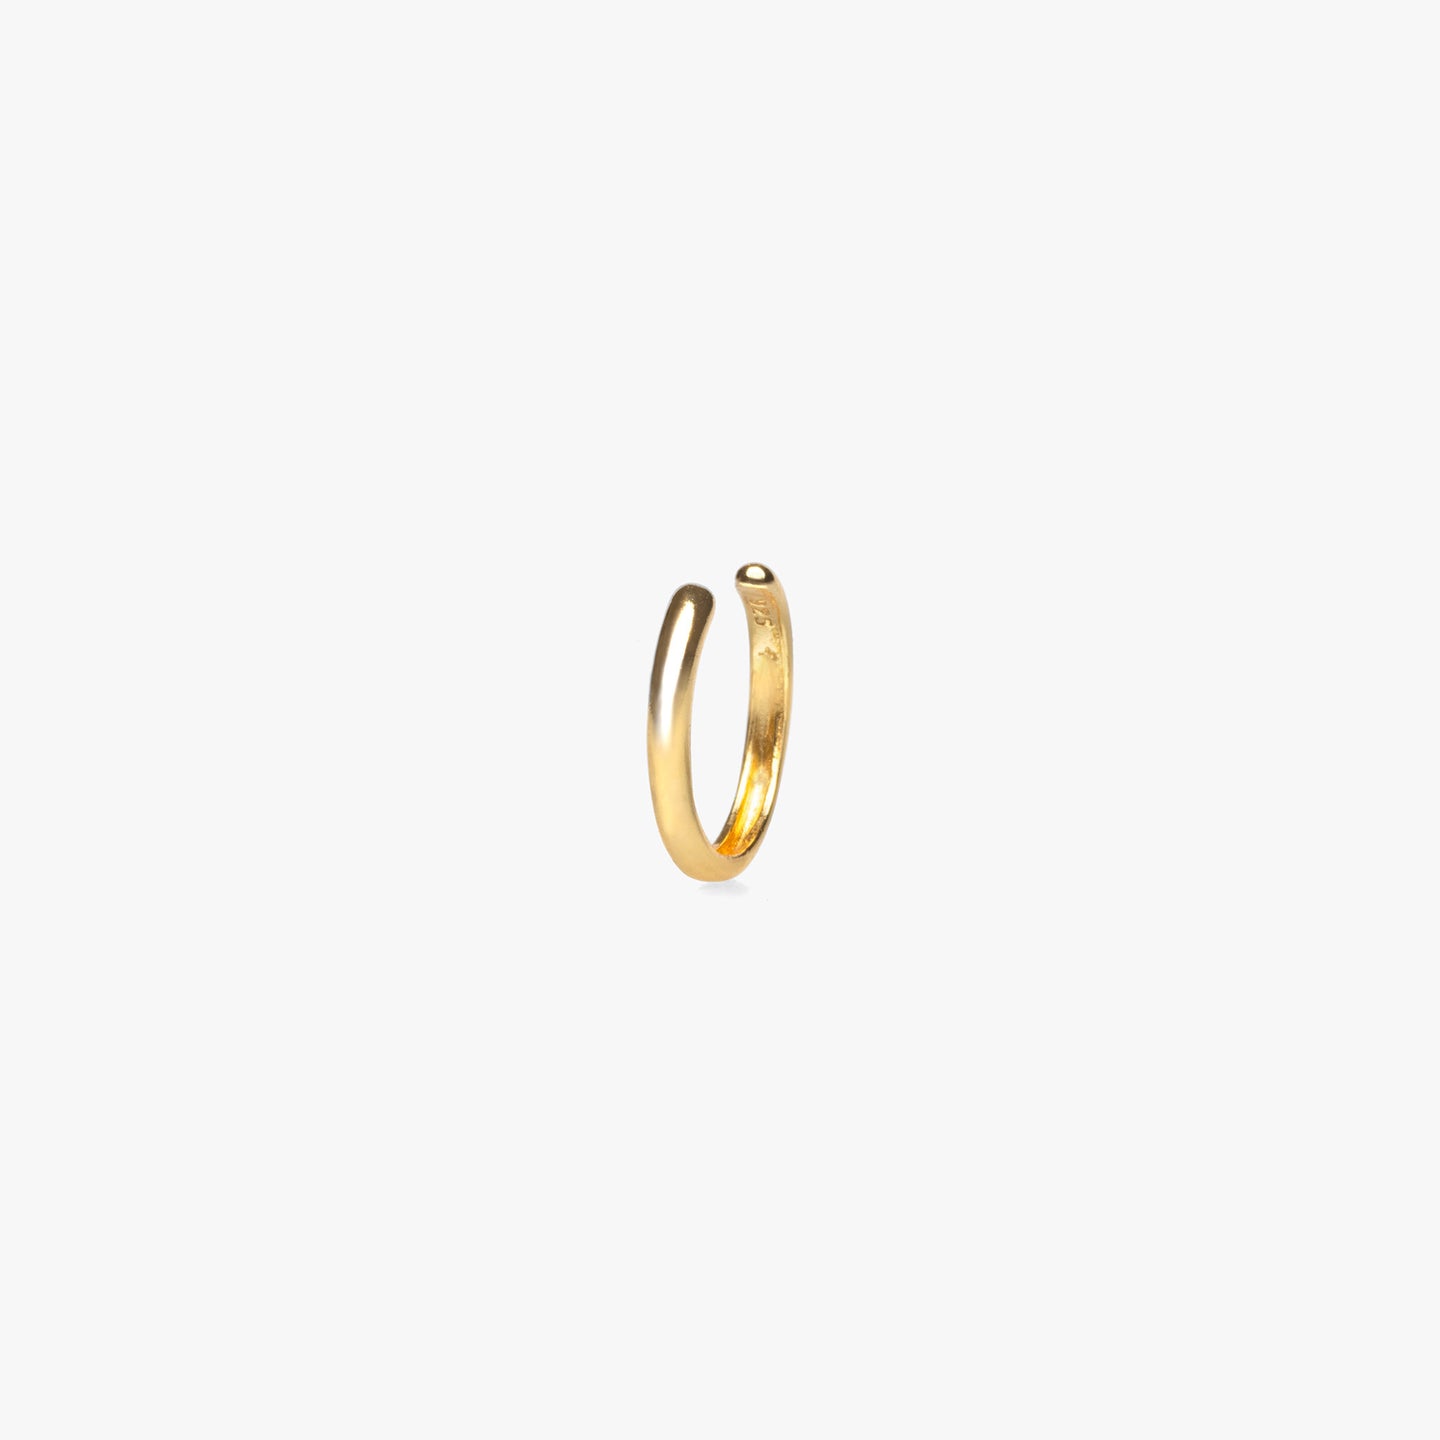 Slim gold ear cuff that requires no piercing. color:gold